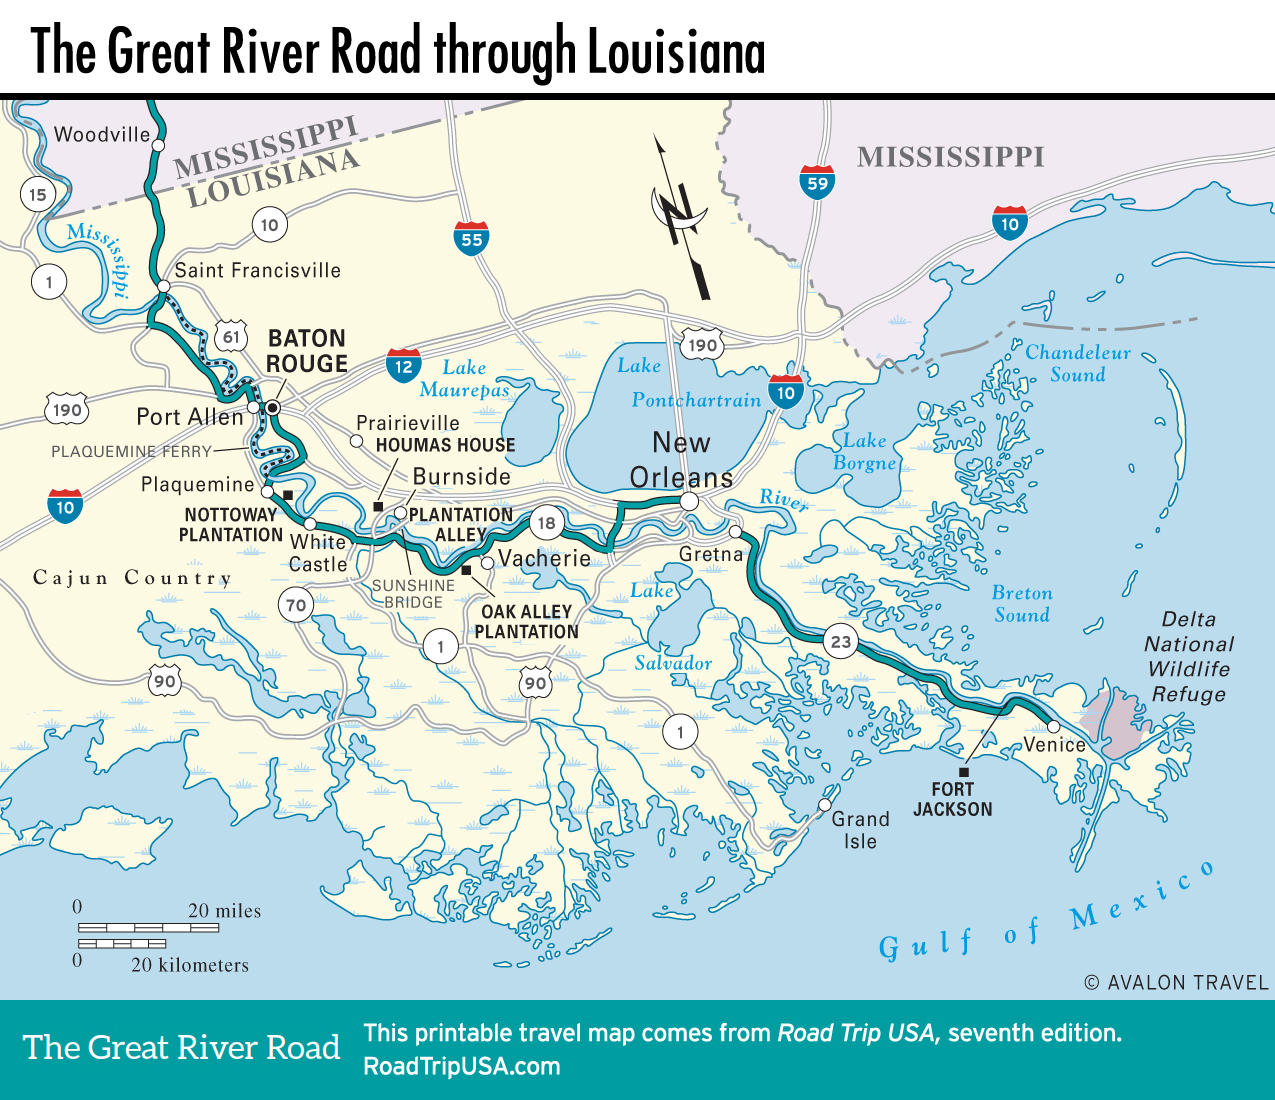 Louisiana Highlights on the Great River Road | ROAD TRIP USA